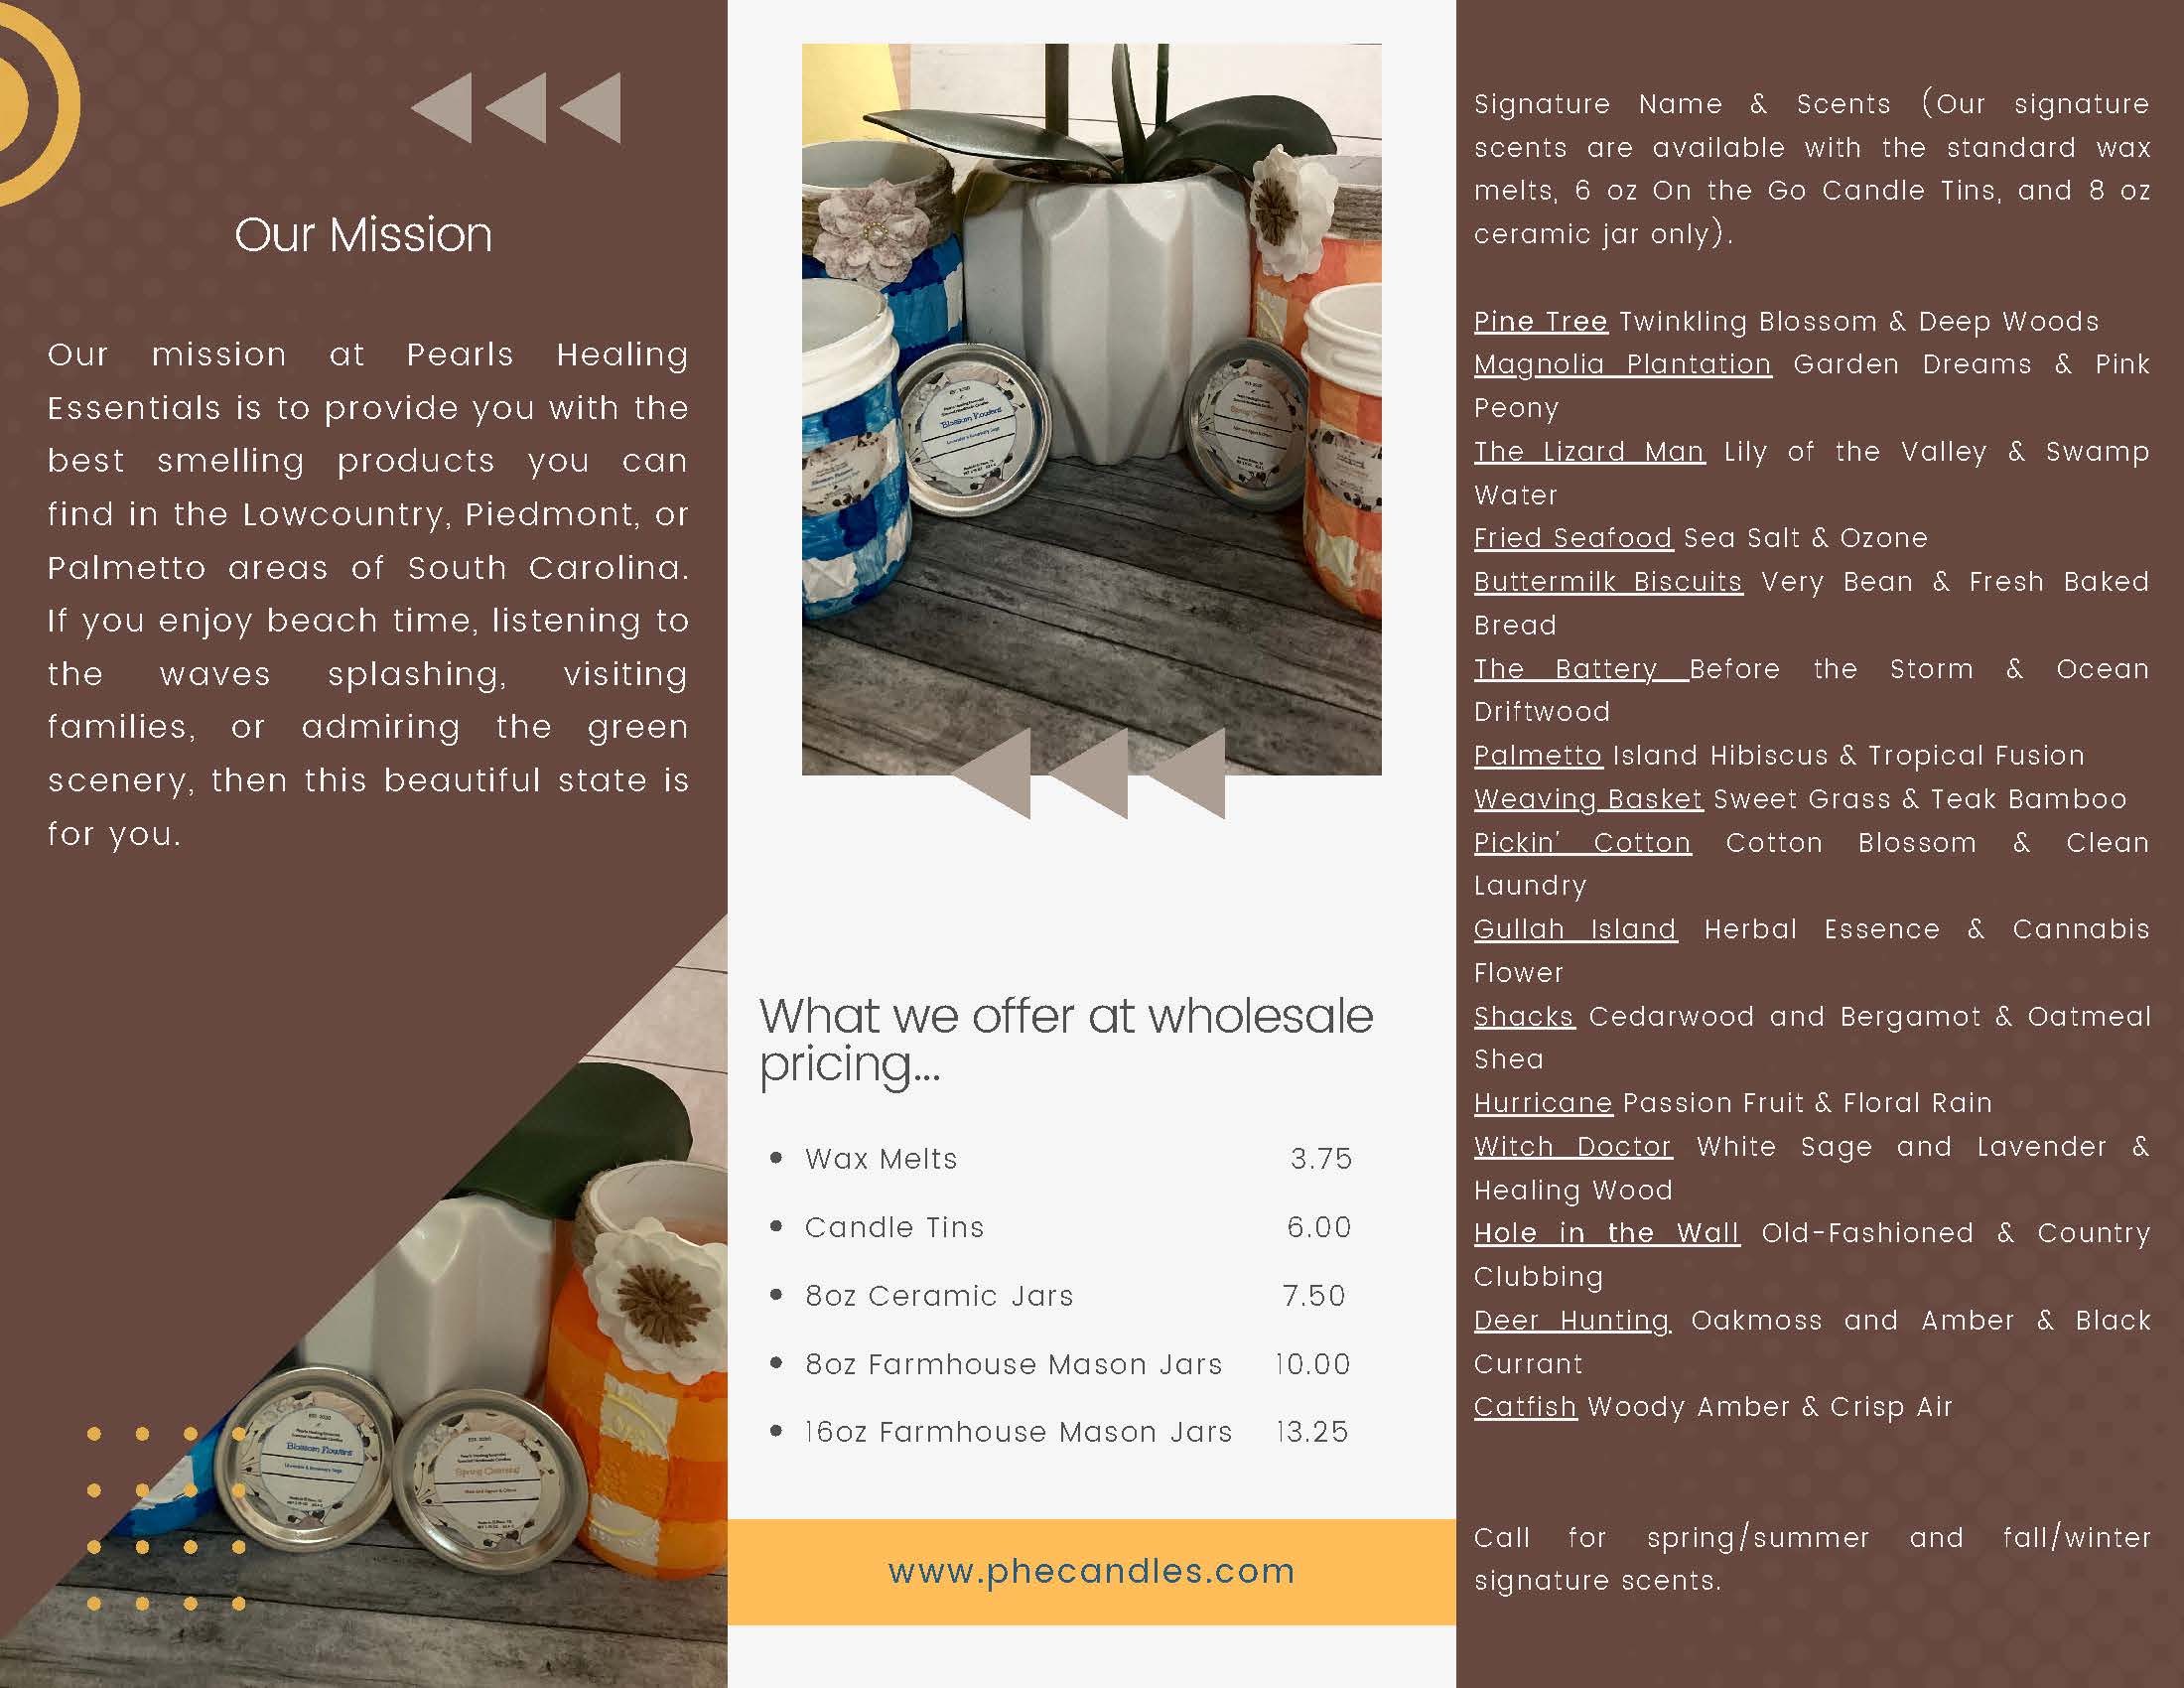 image-967376-PHE_Candle_Brochure_for_Wholesale_Page_2-c9f0f.jpg